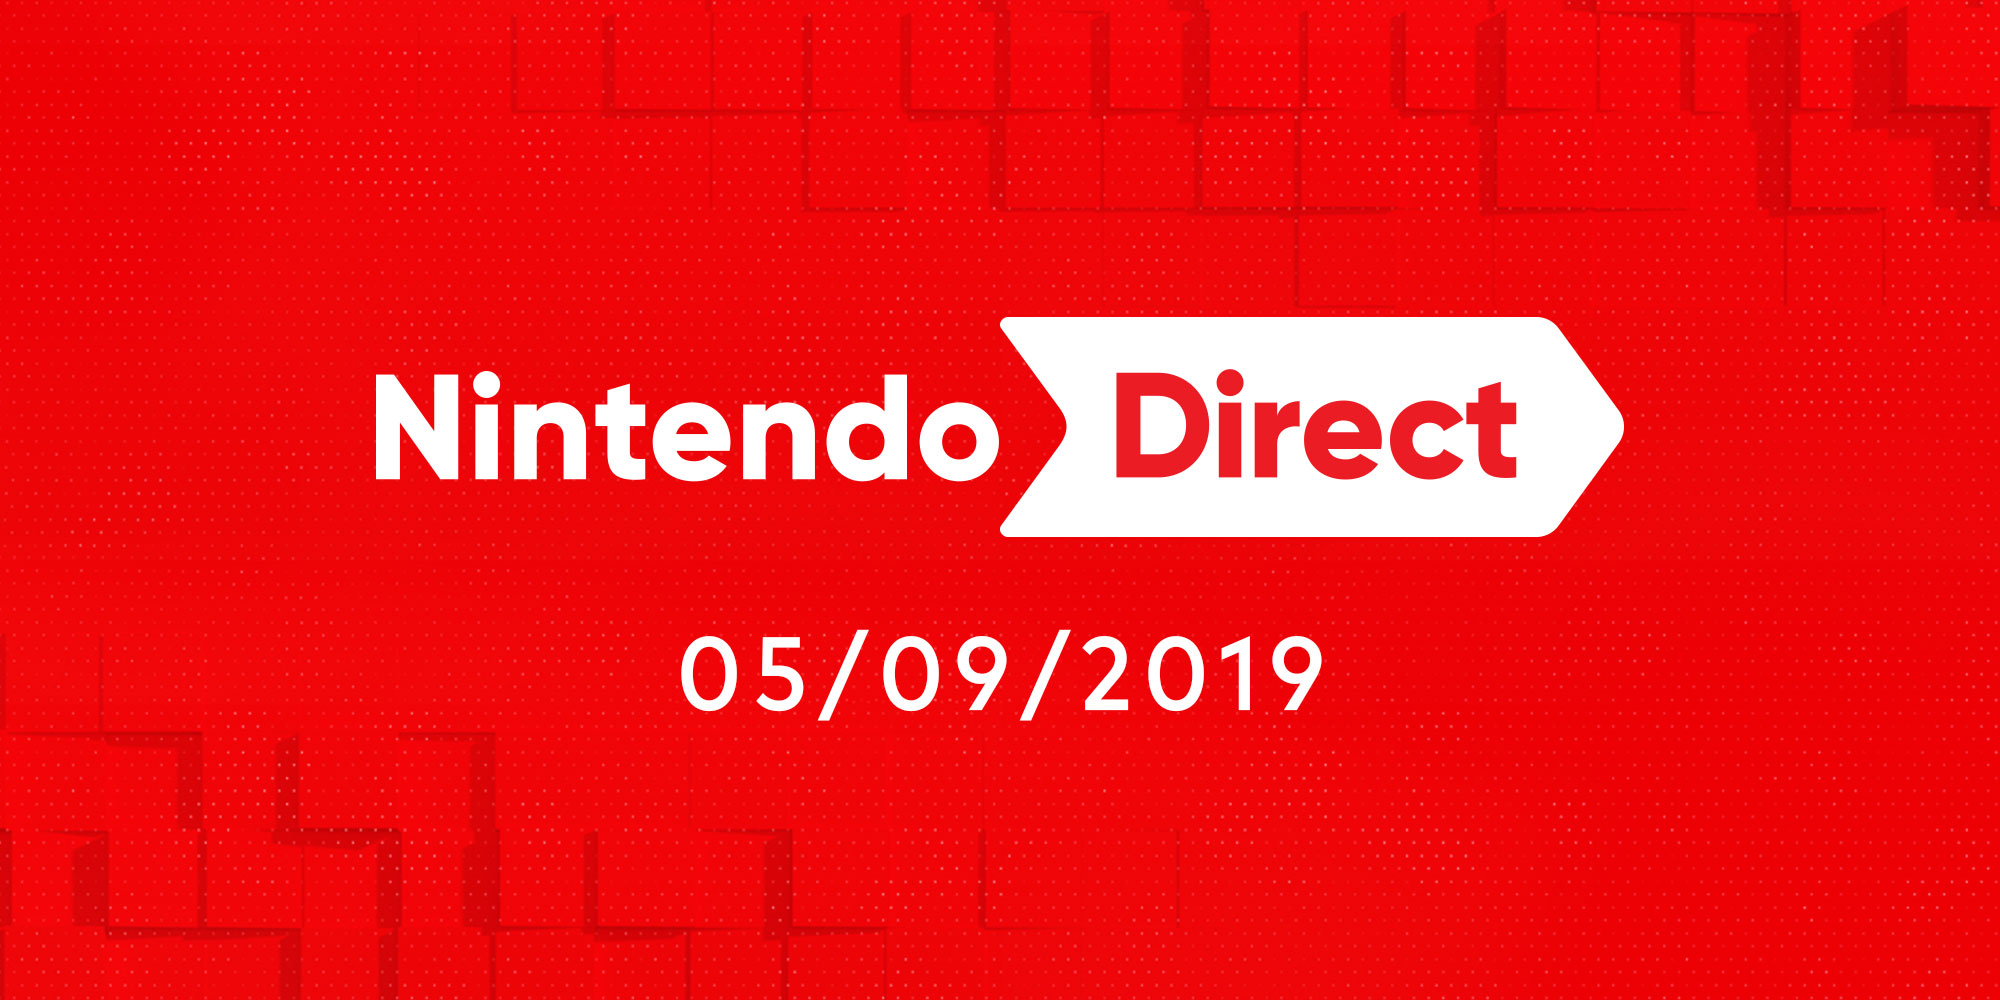 New Nintendo Direct presentation airs this Wednesday at 12pm local time